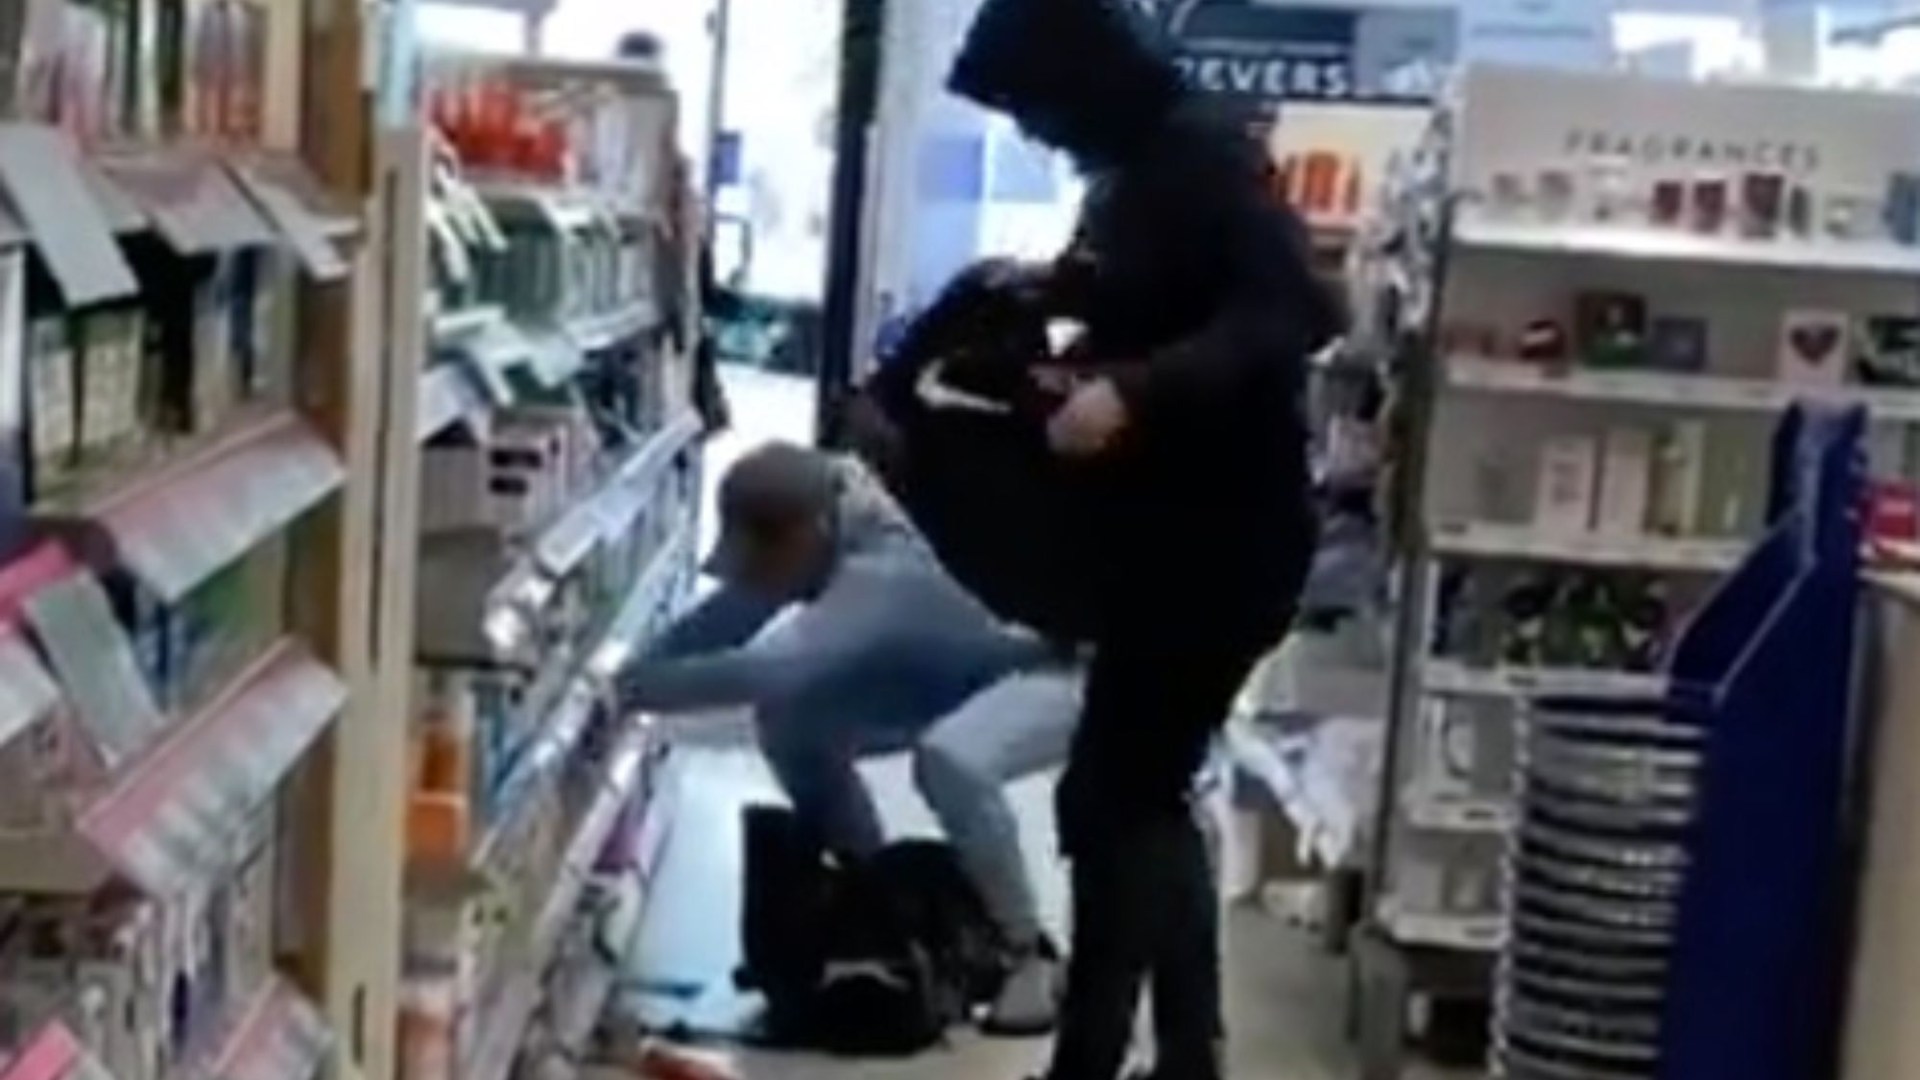 No wonder brazen shoplifting is on the rise… there’s no deterrent when the police don’t bother to investigate properly [Video]